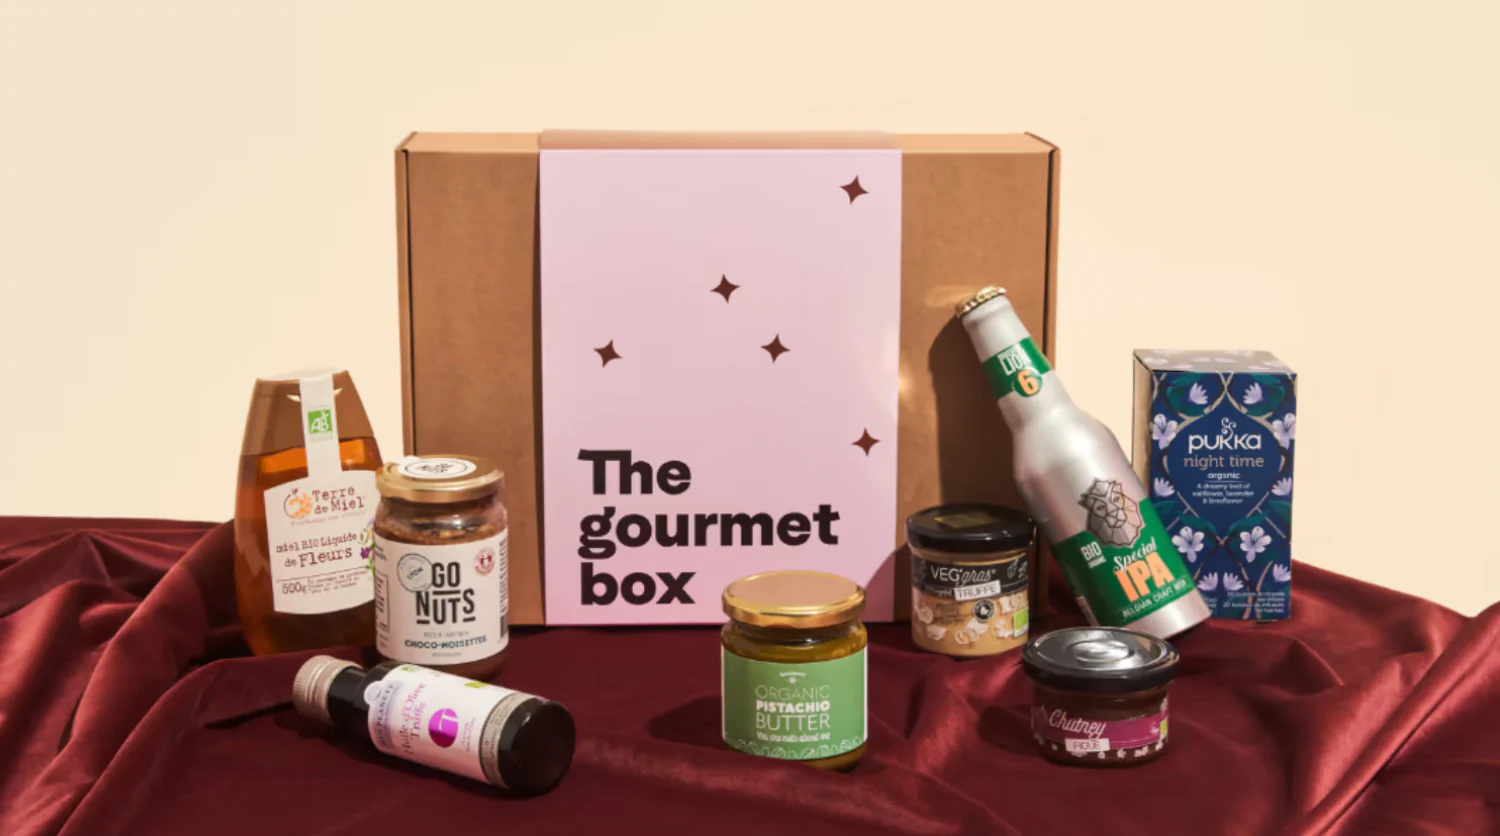 The Gourmet Box, the divinely gourmet assortment to sublimate meals and aperitifs during the holidays.